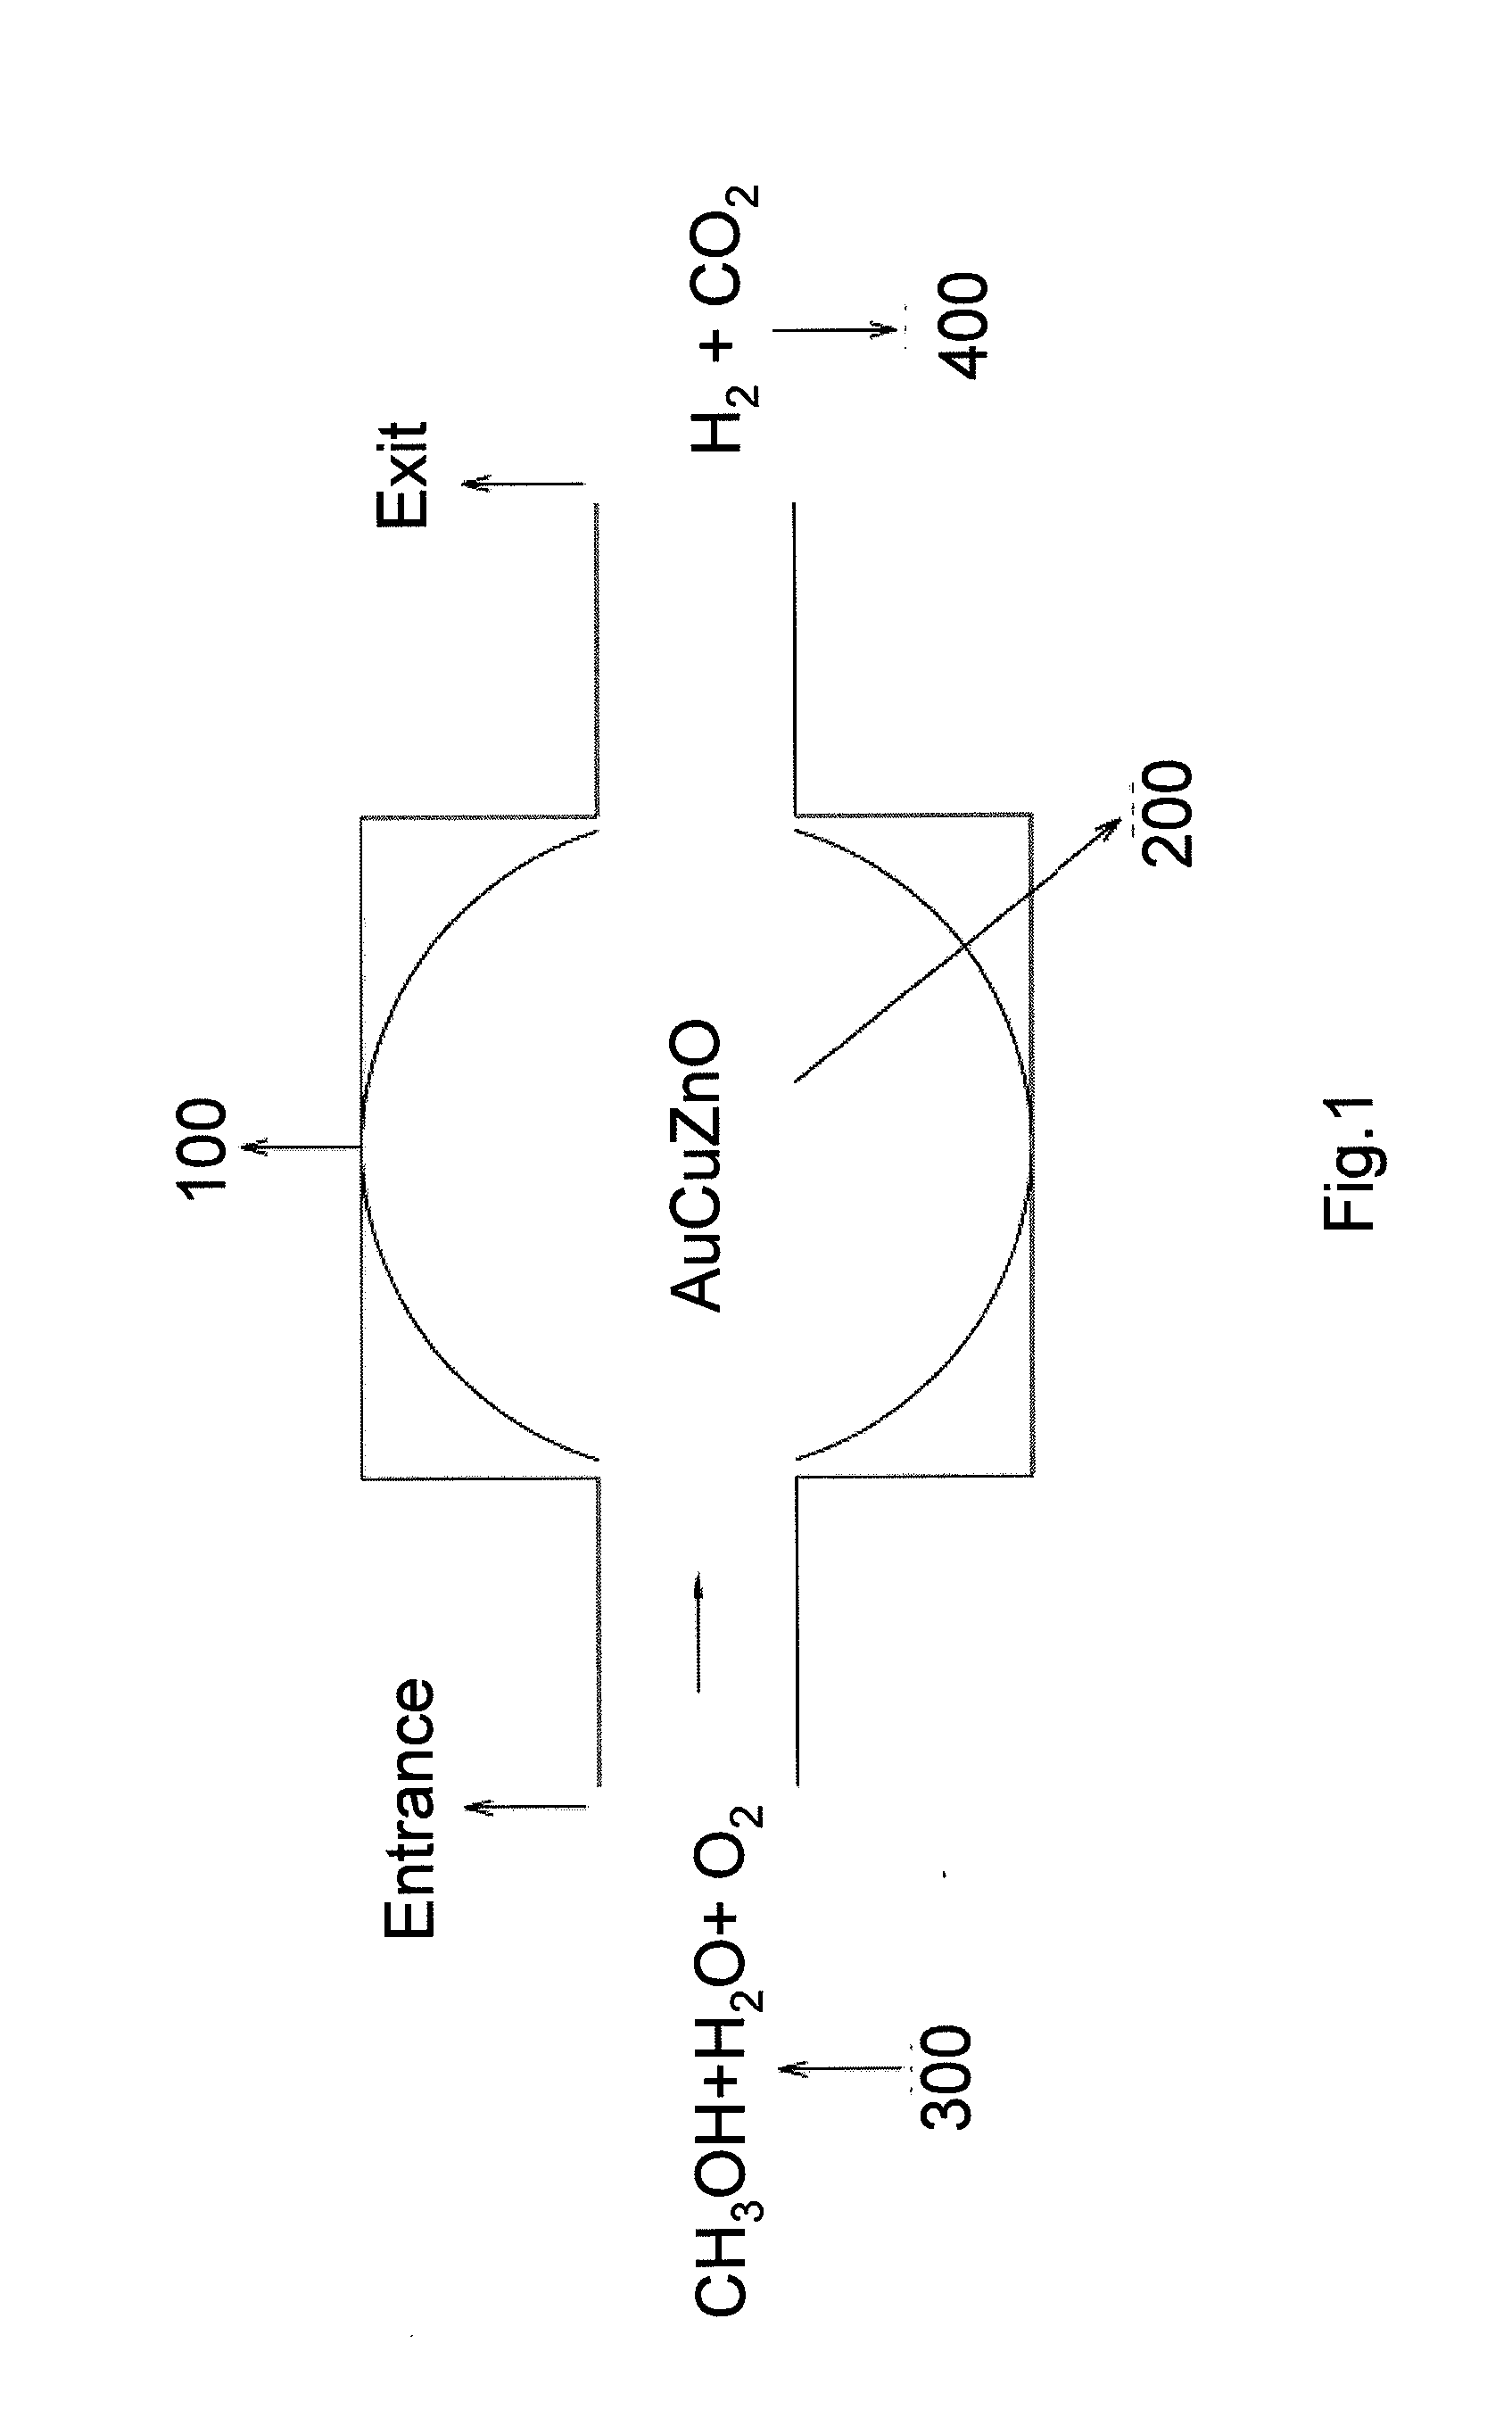 Process for producing hydrogen at low temperature